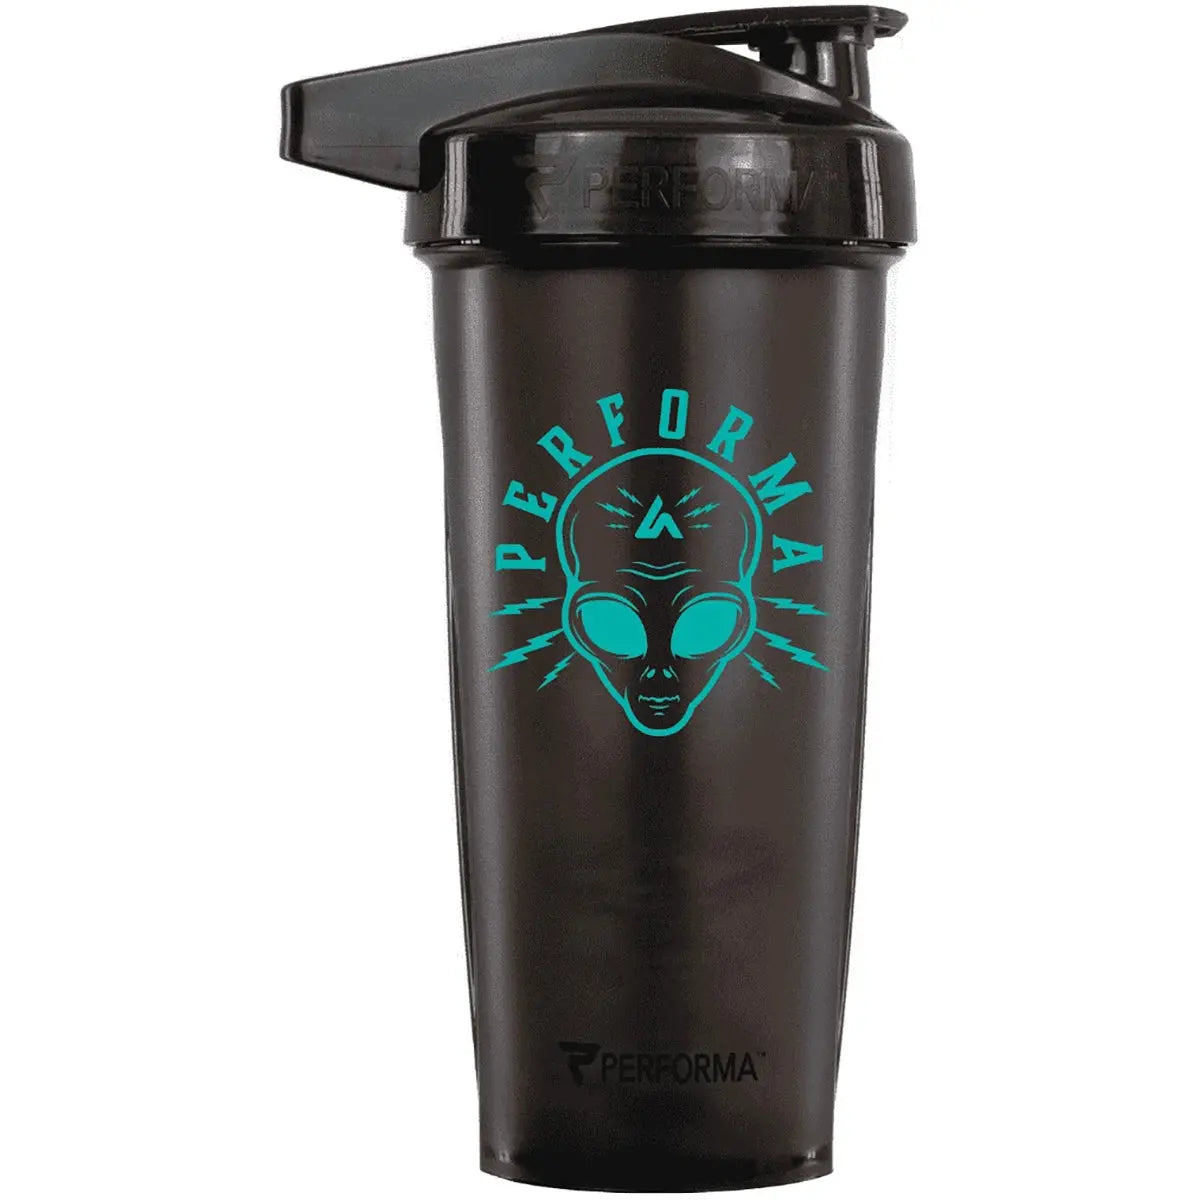 Performa Activ 28 oz. Shaker Cup Gym Bottle - Area 51 Performa